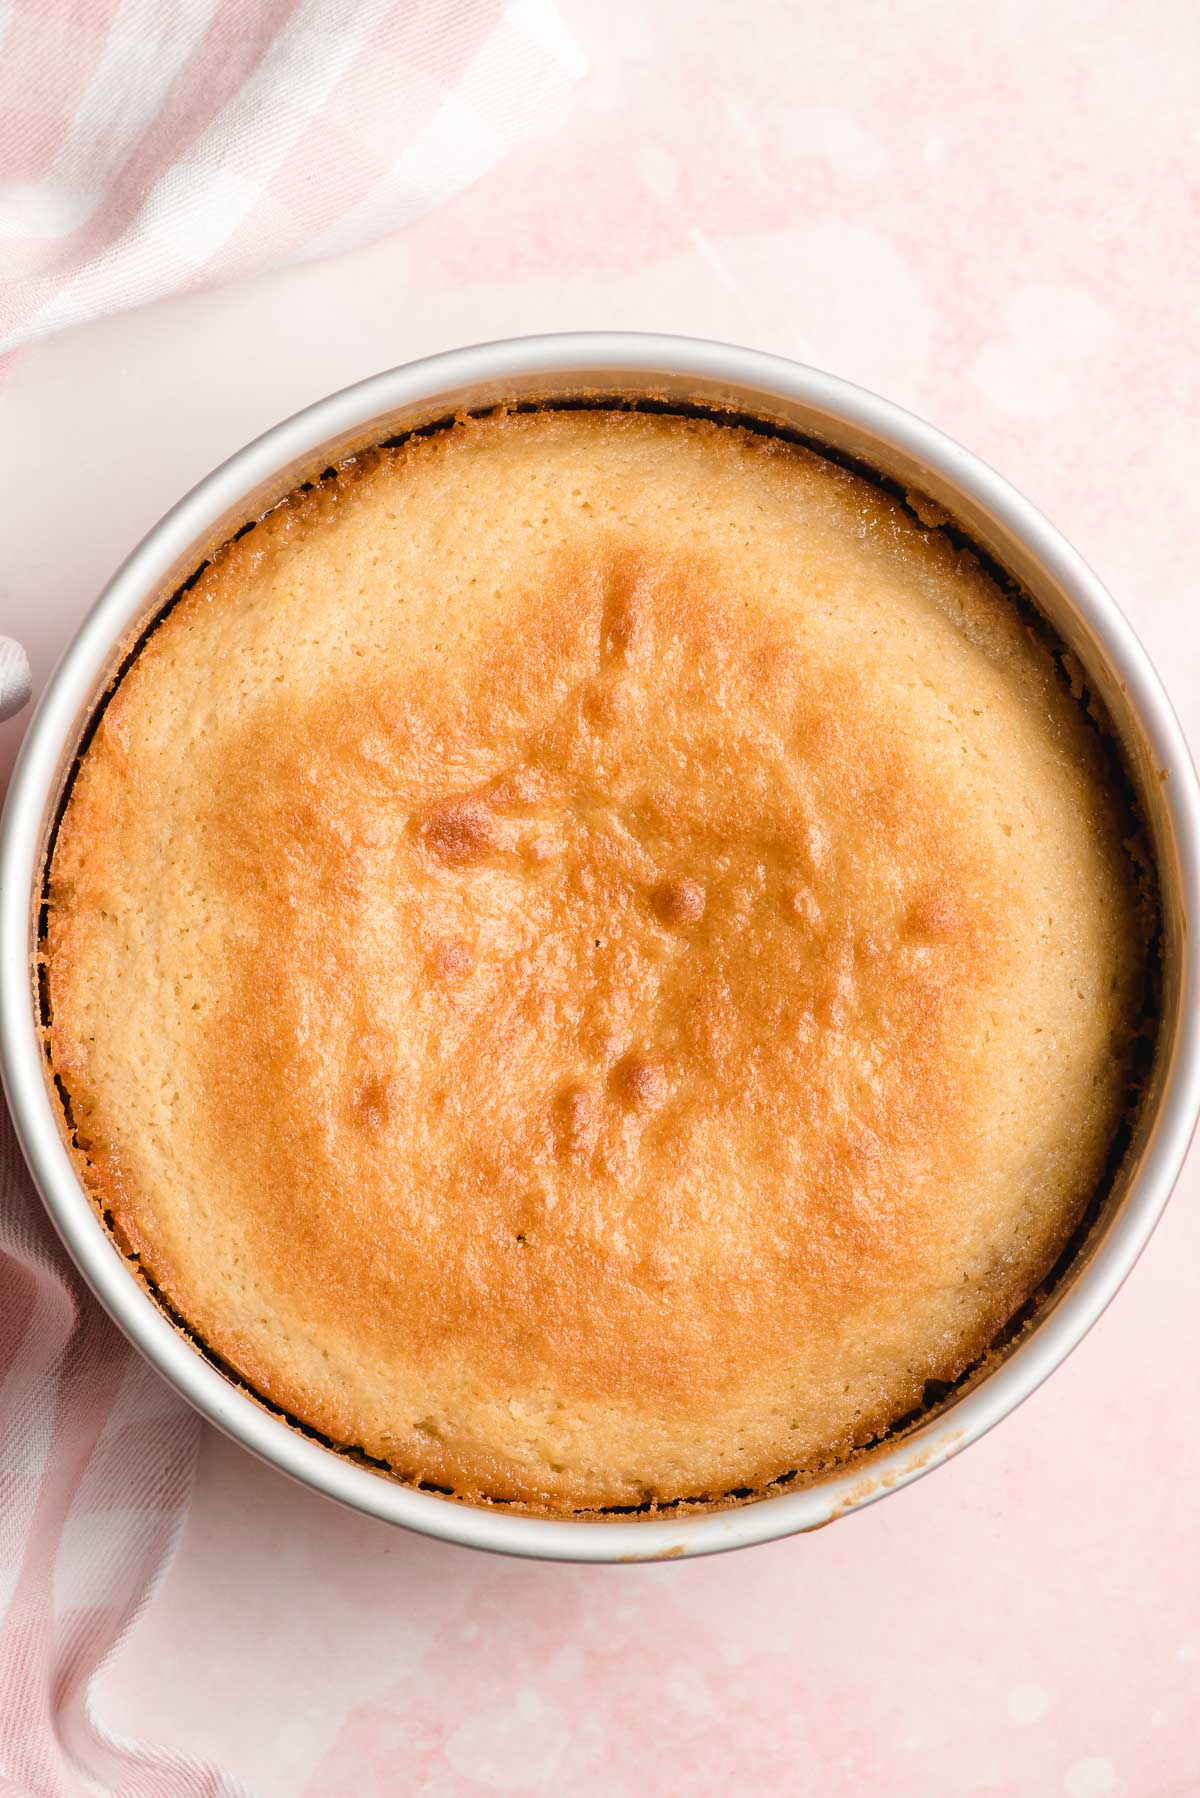 Fresh baked upside down cake, shown in the pan before it's turned out.